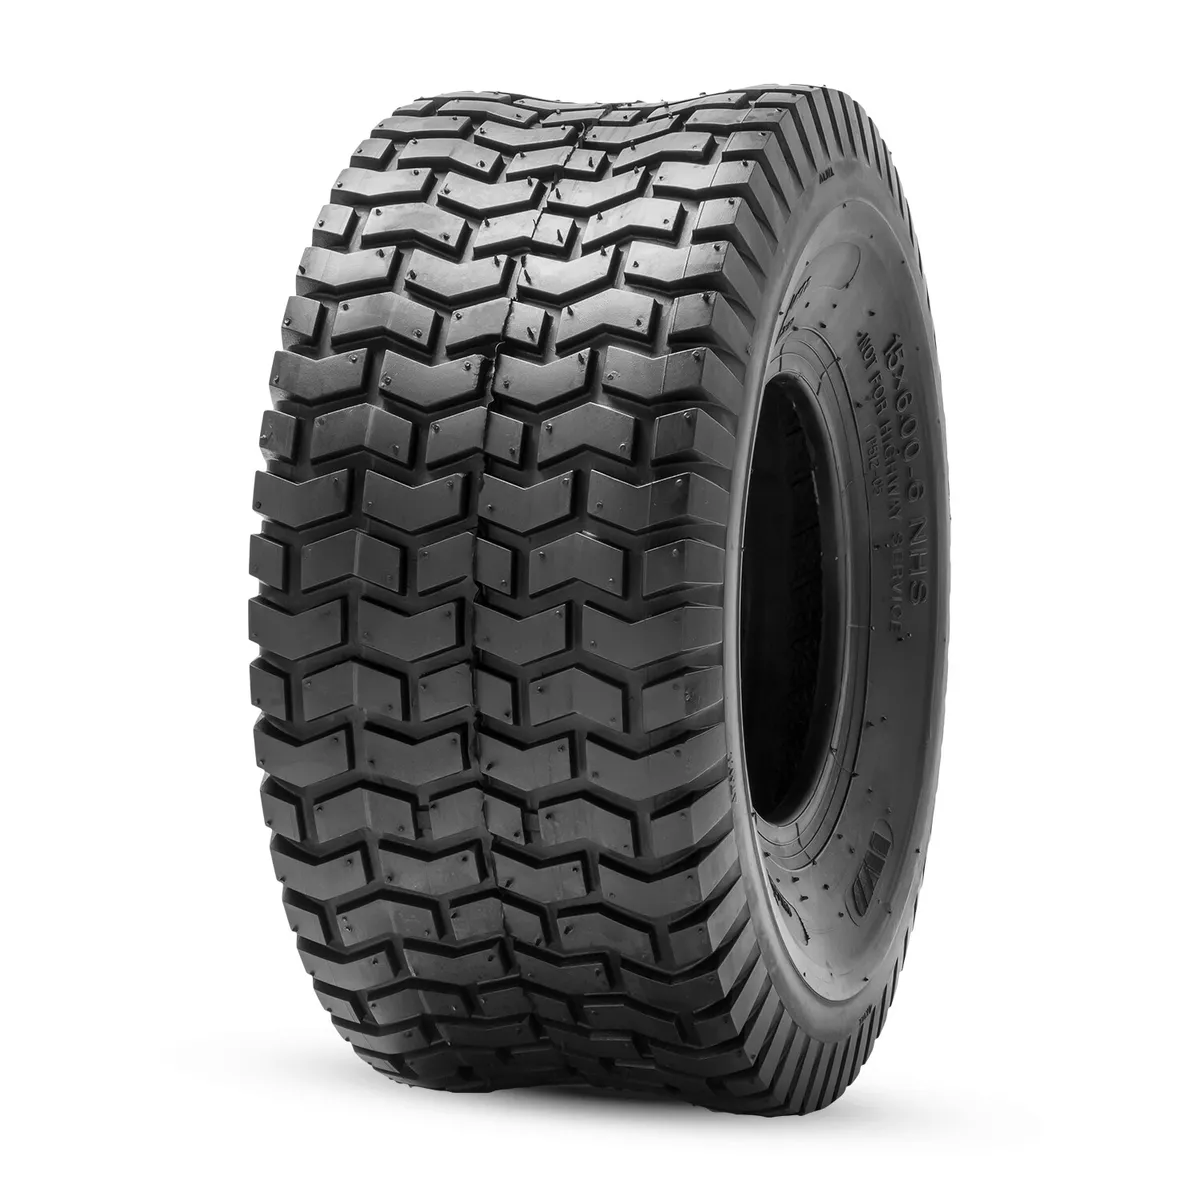 15x6x6 tire and wheel